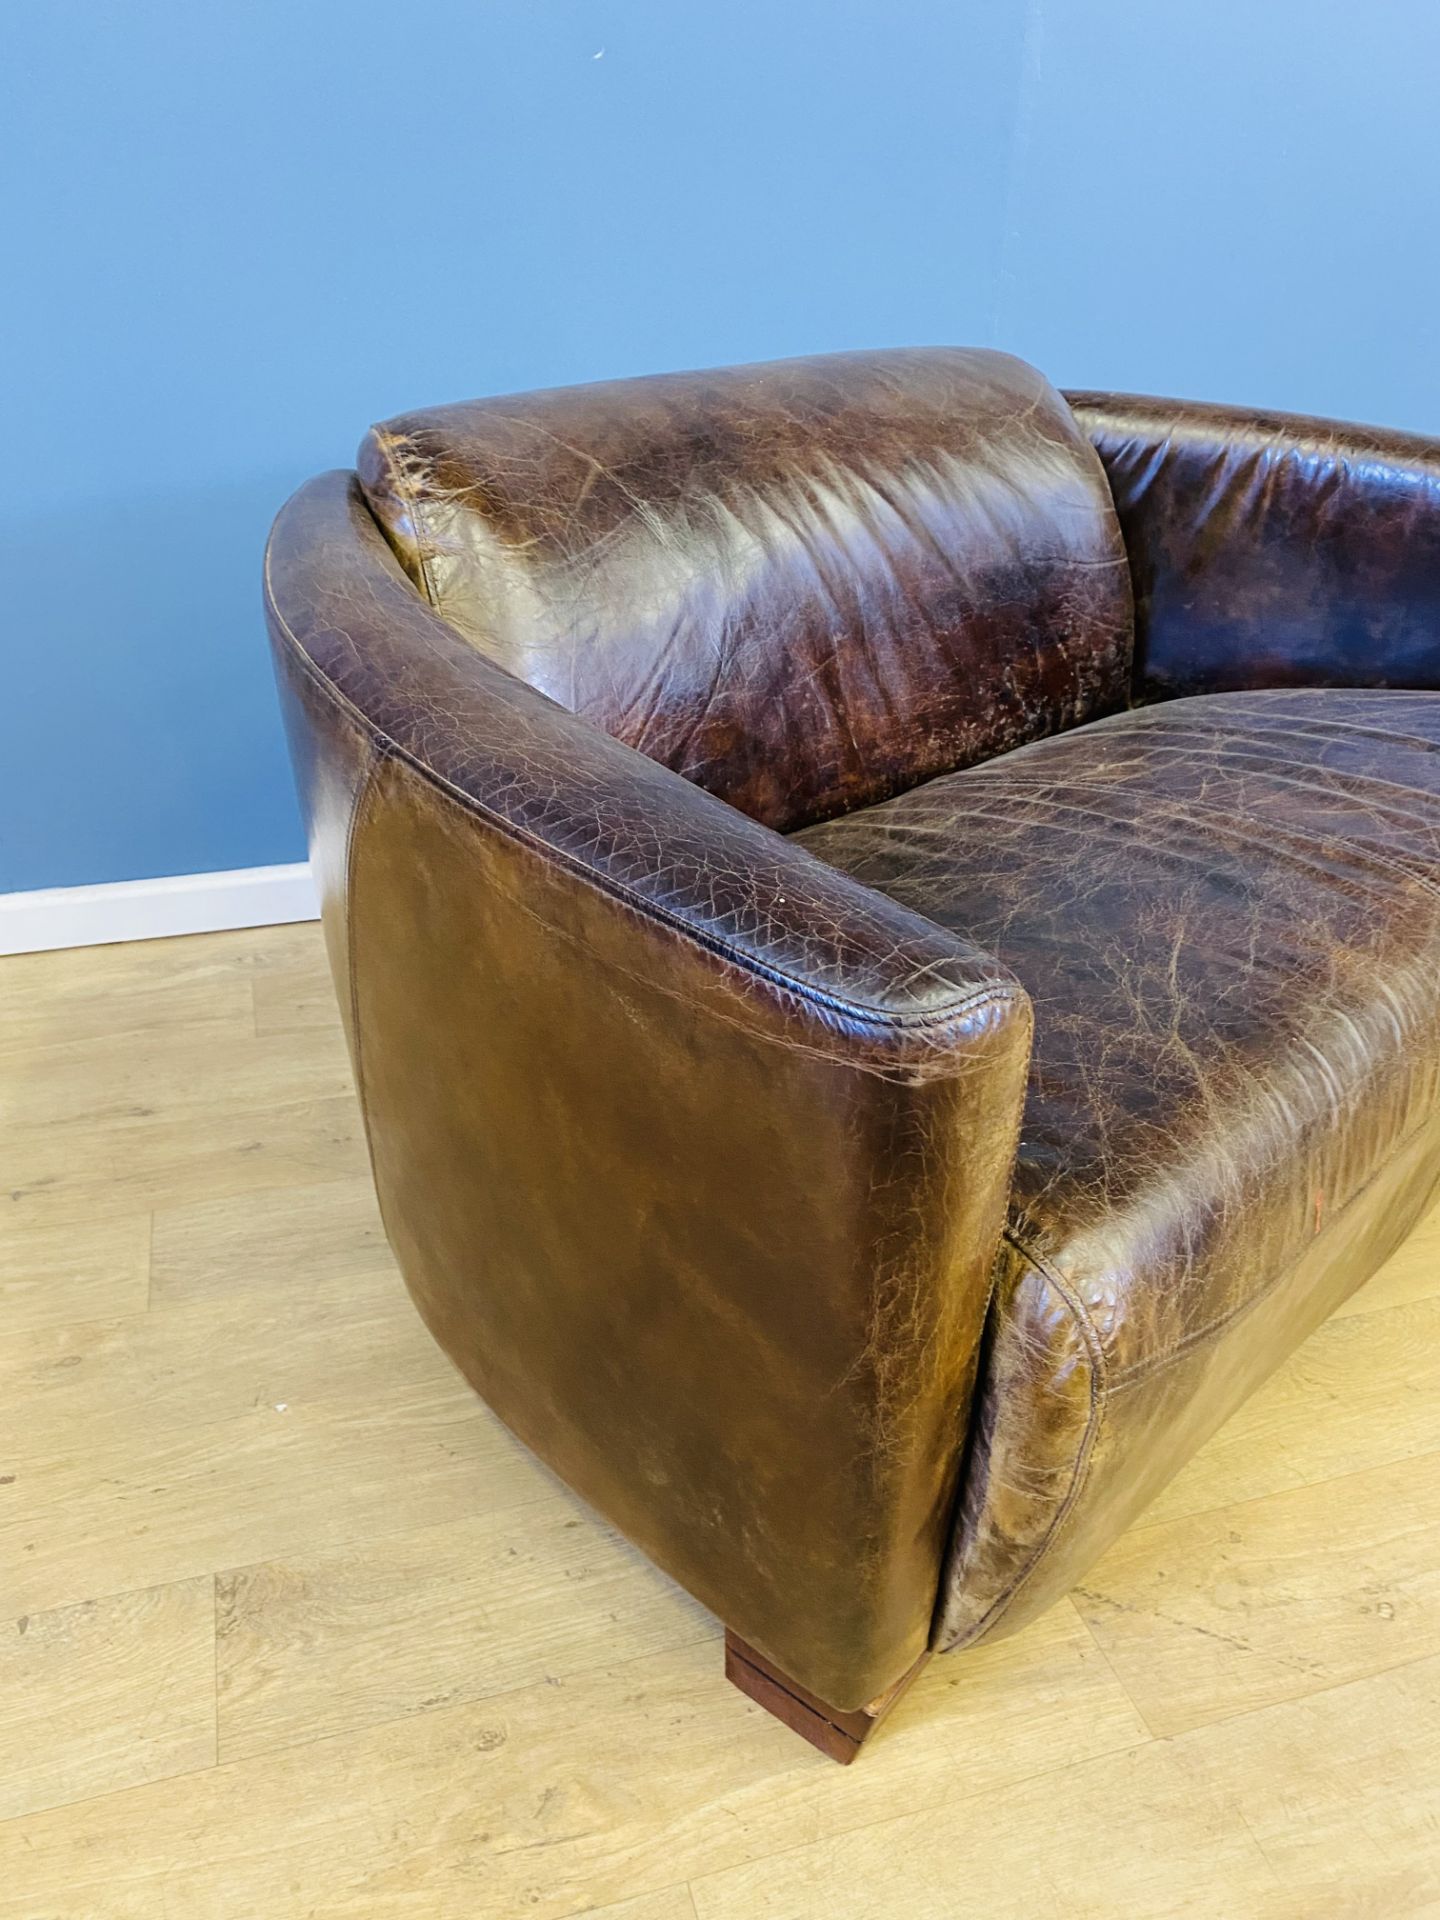 Leather art deco style settee - Image 4 of 5